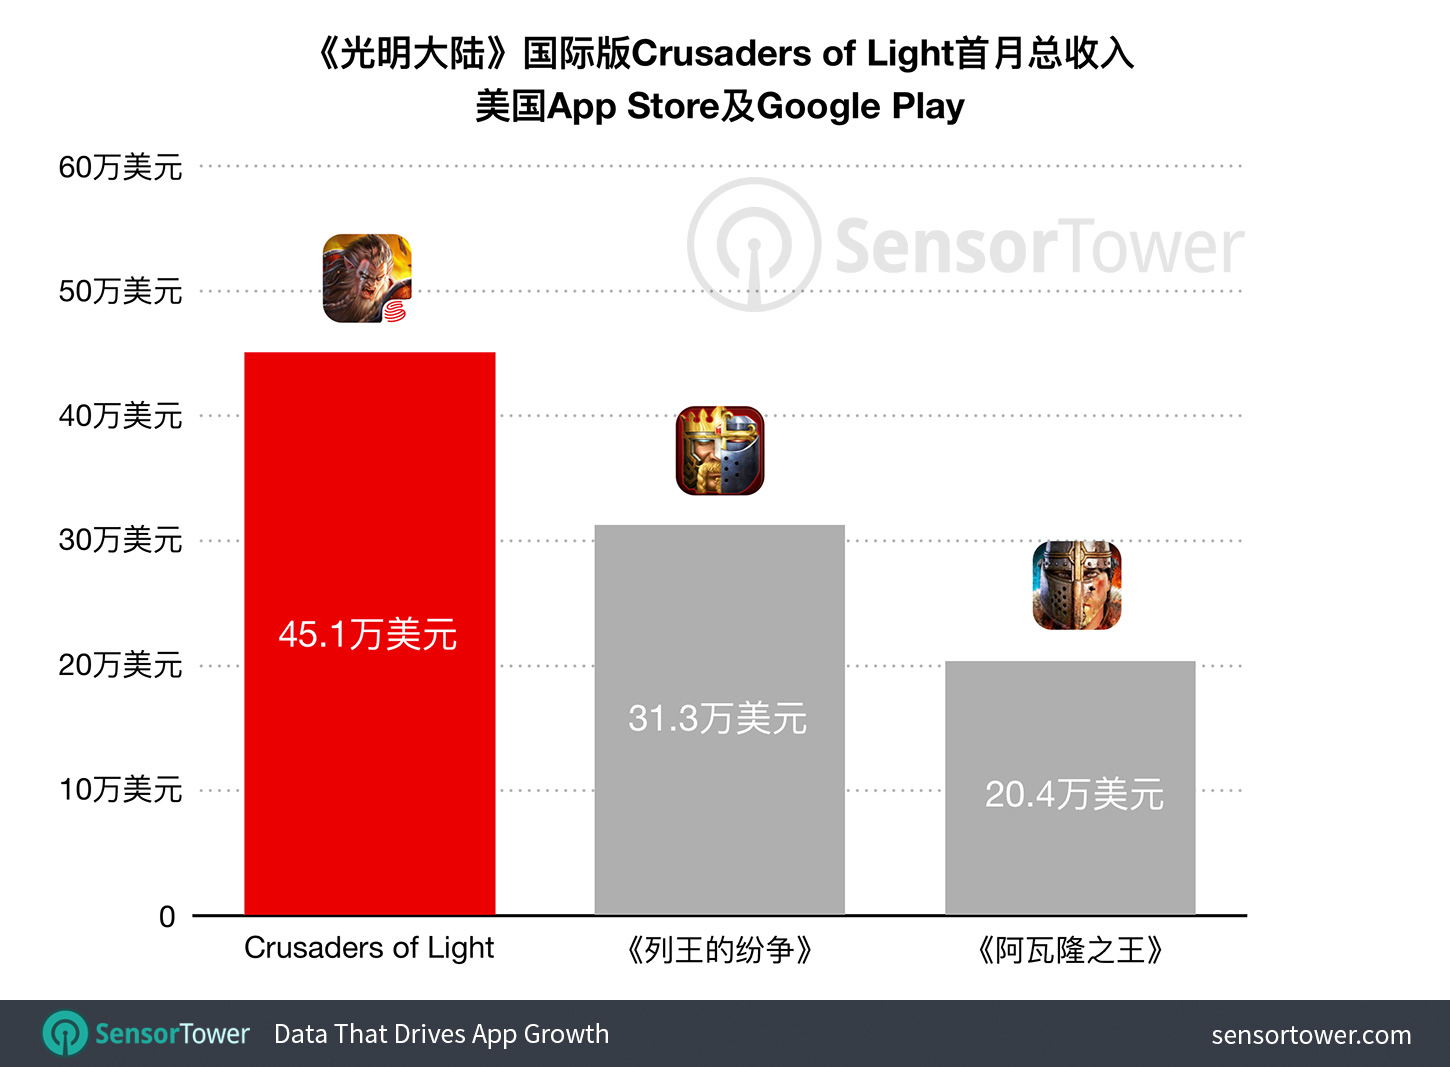 Crusaders of Light first month revenue compared to other Chinese mobile game launches in the U.S.